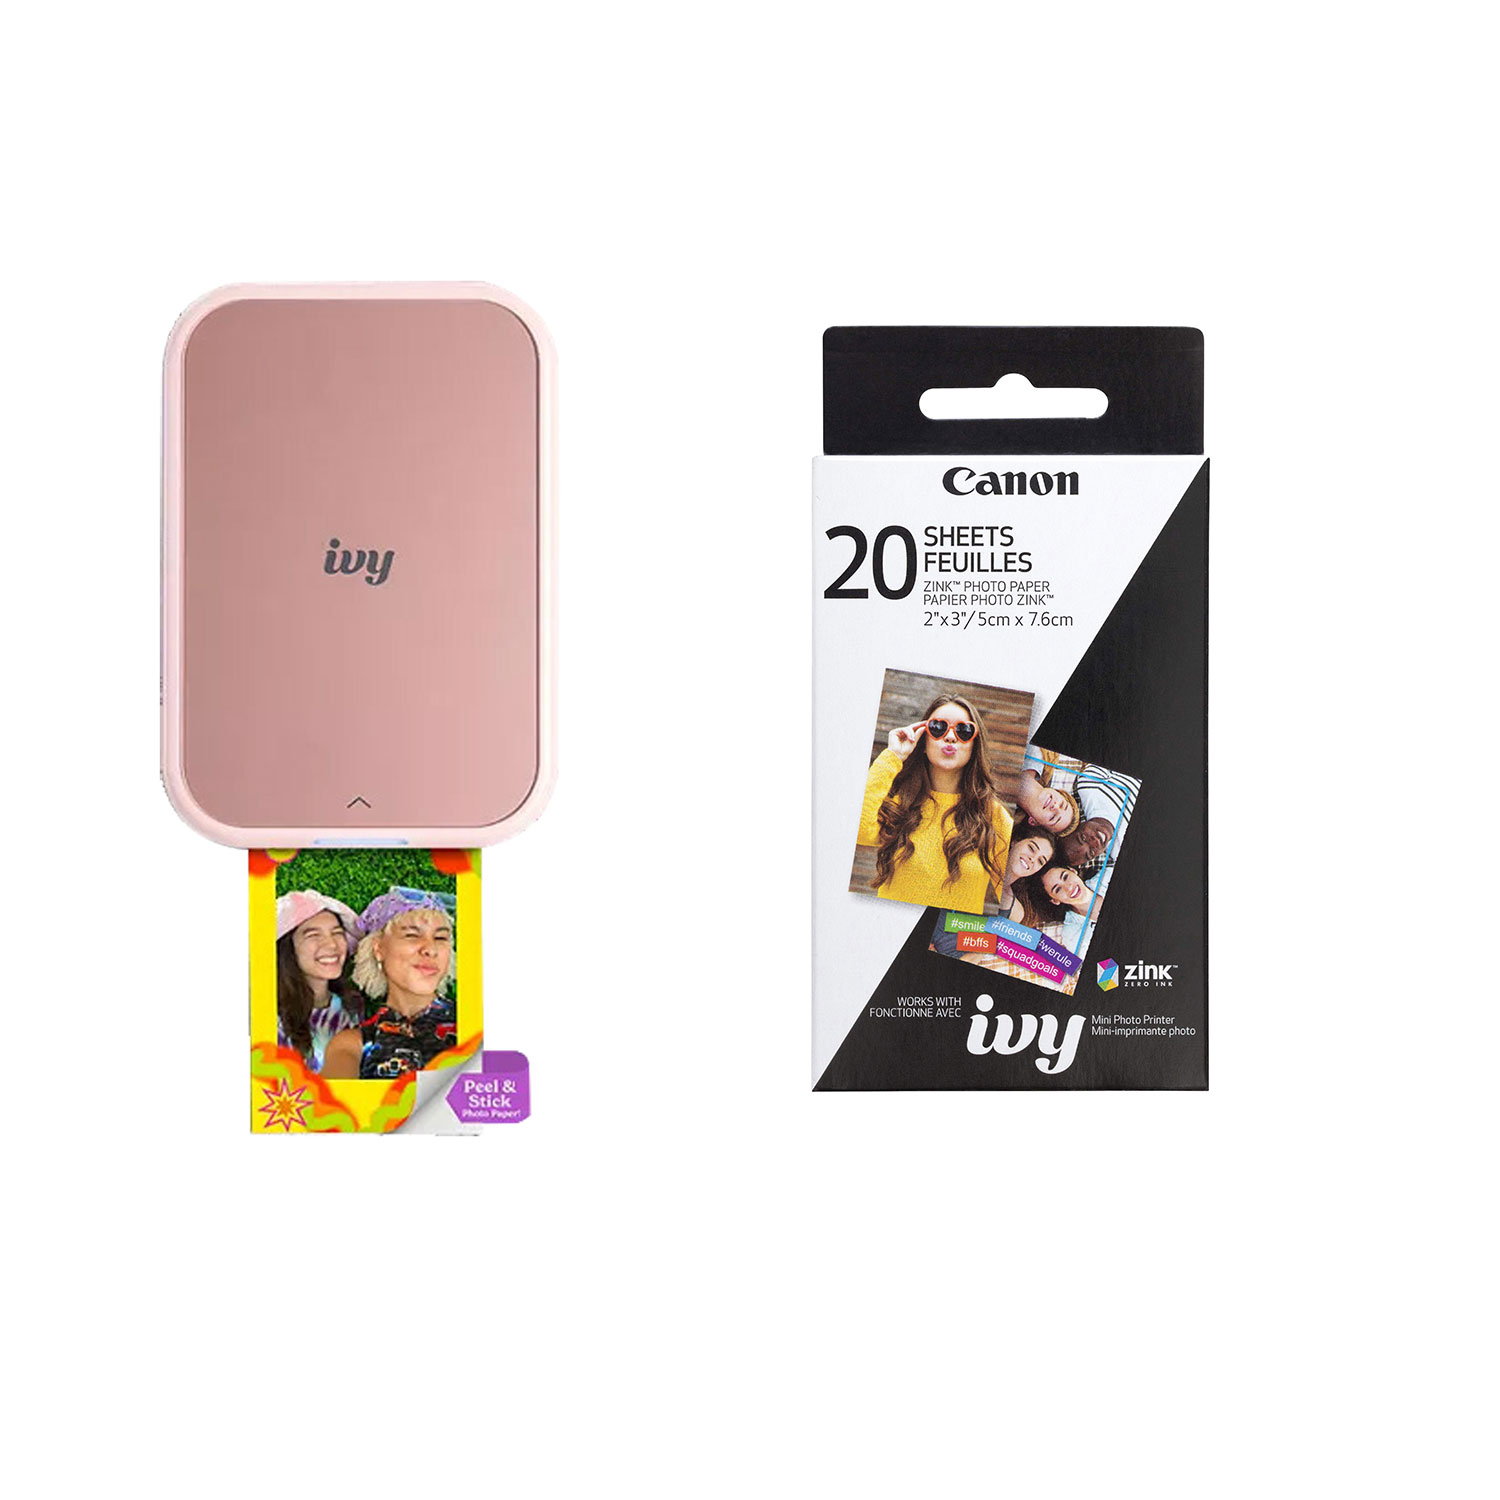 Canon IVY 2 Mini Wireless Photo Printer - Blush Pink with Photo Paper ( 20 Sheets)